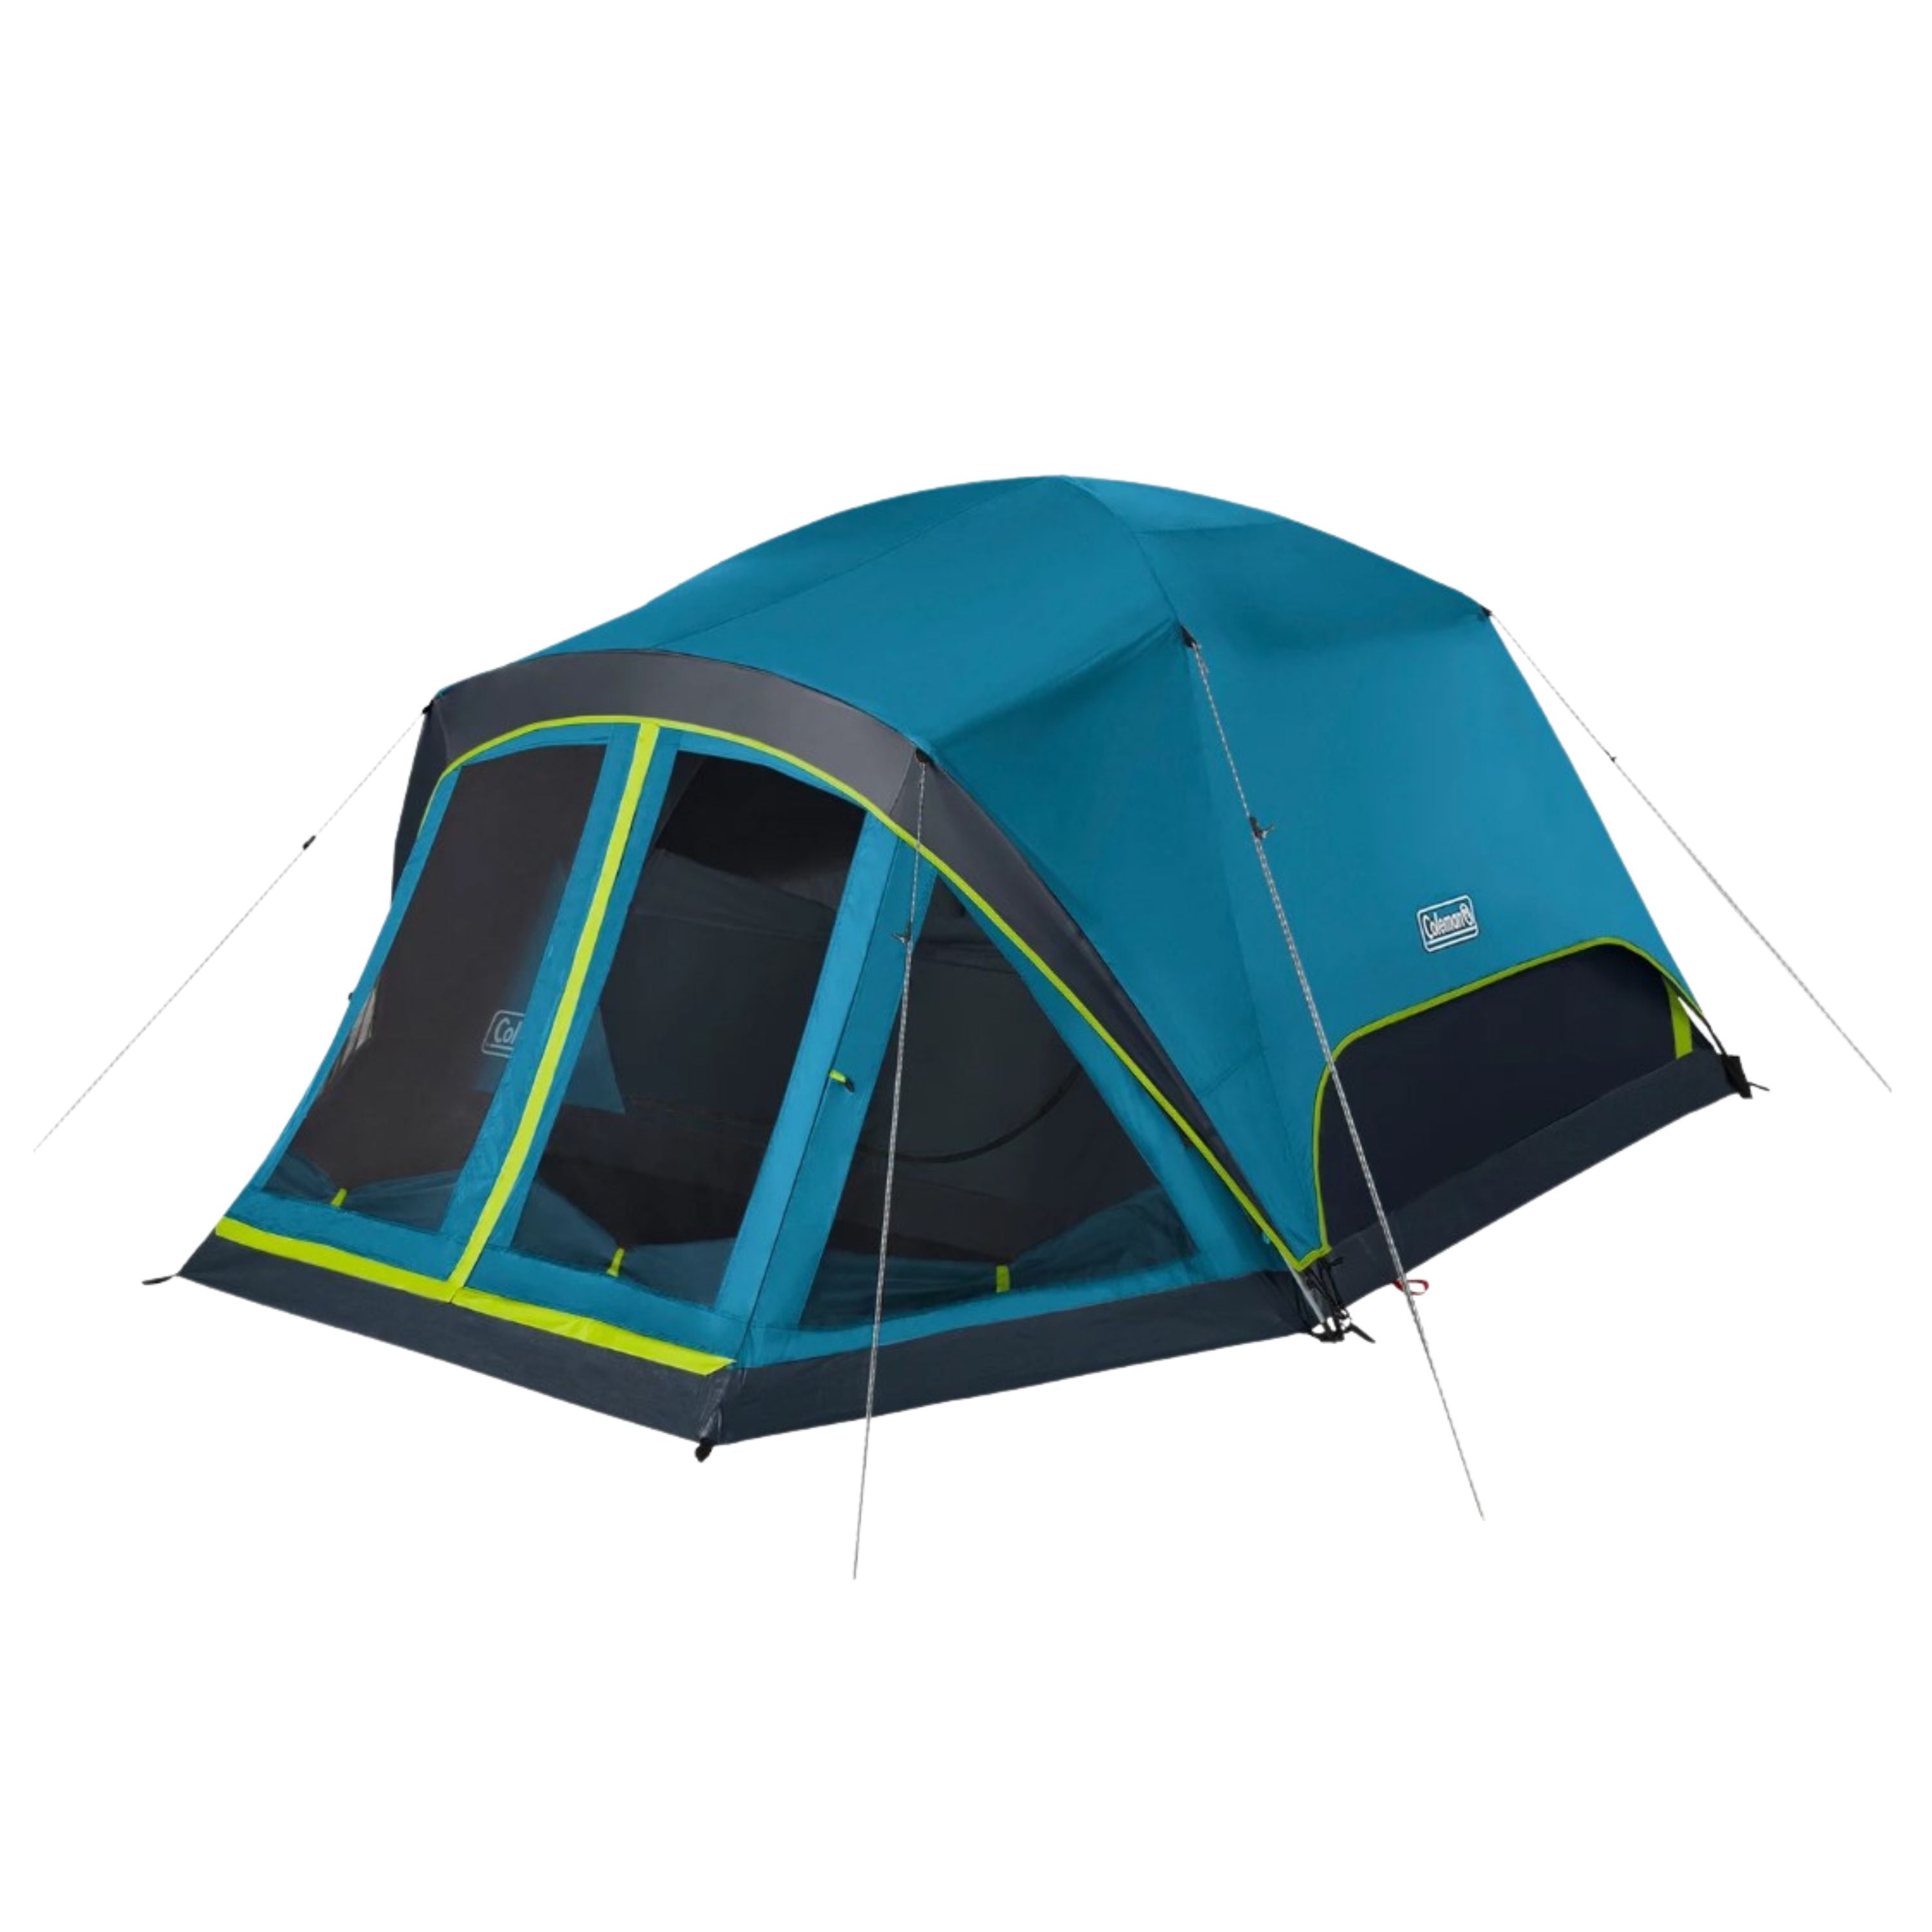 "Skydome" Tent - 4 persons